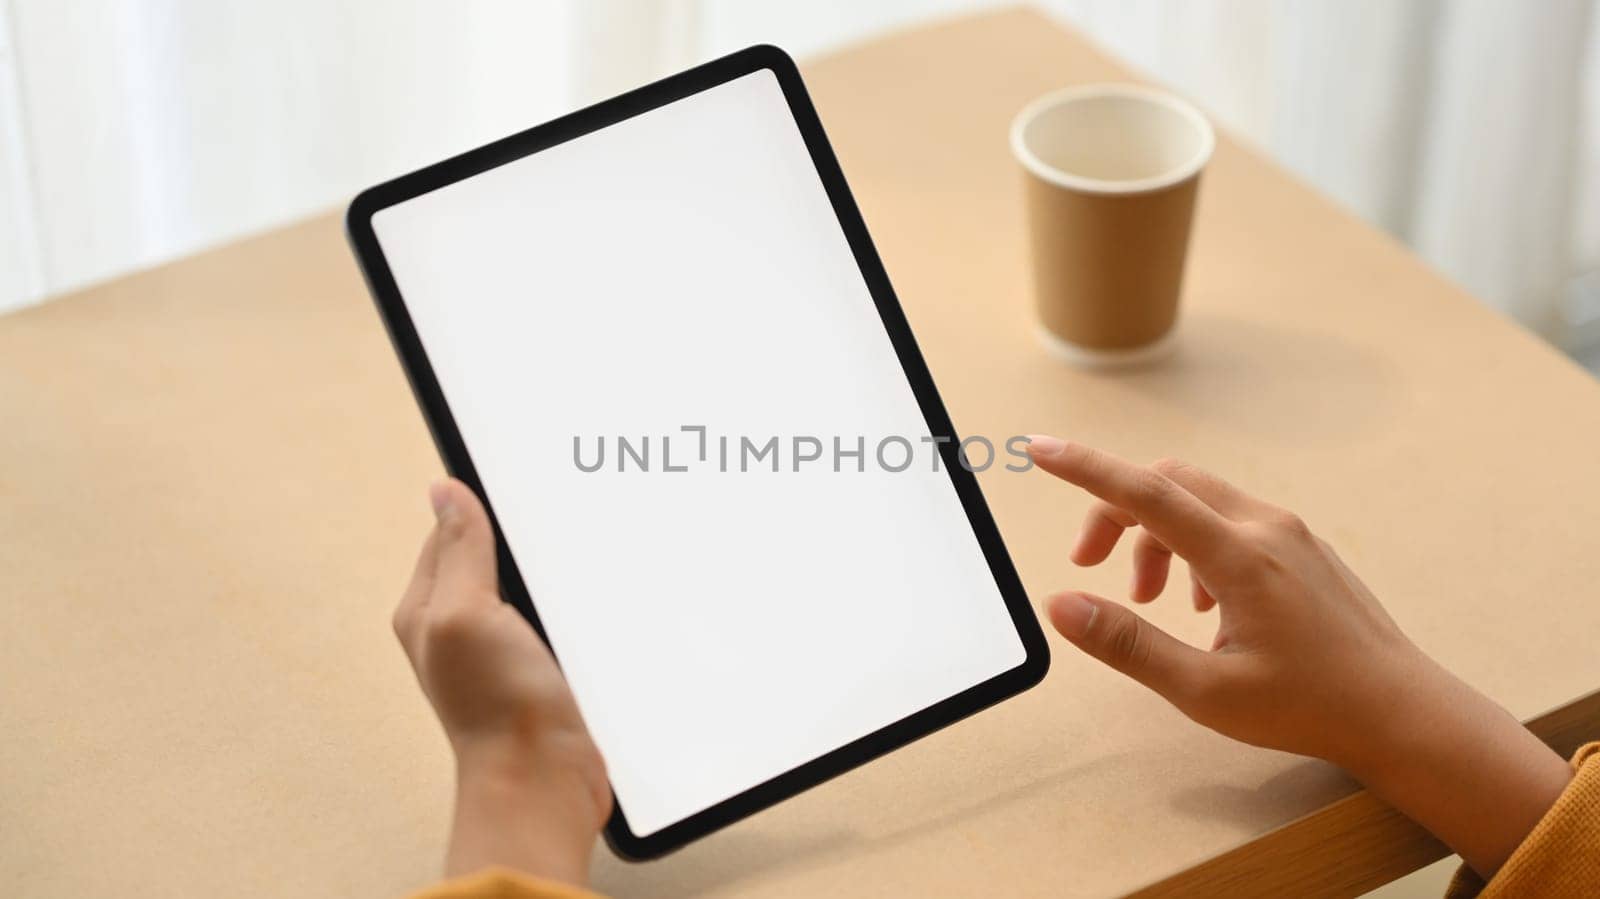 Woman hand holding digital tablet with white blank screen for advertisement. Close up view.